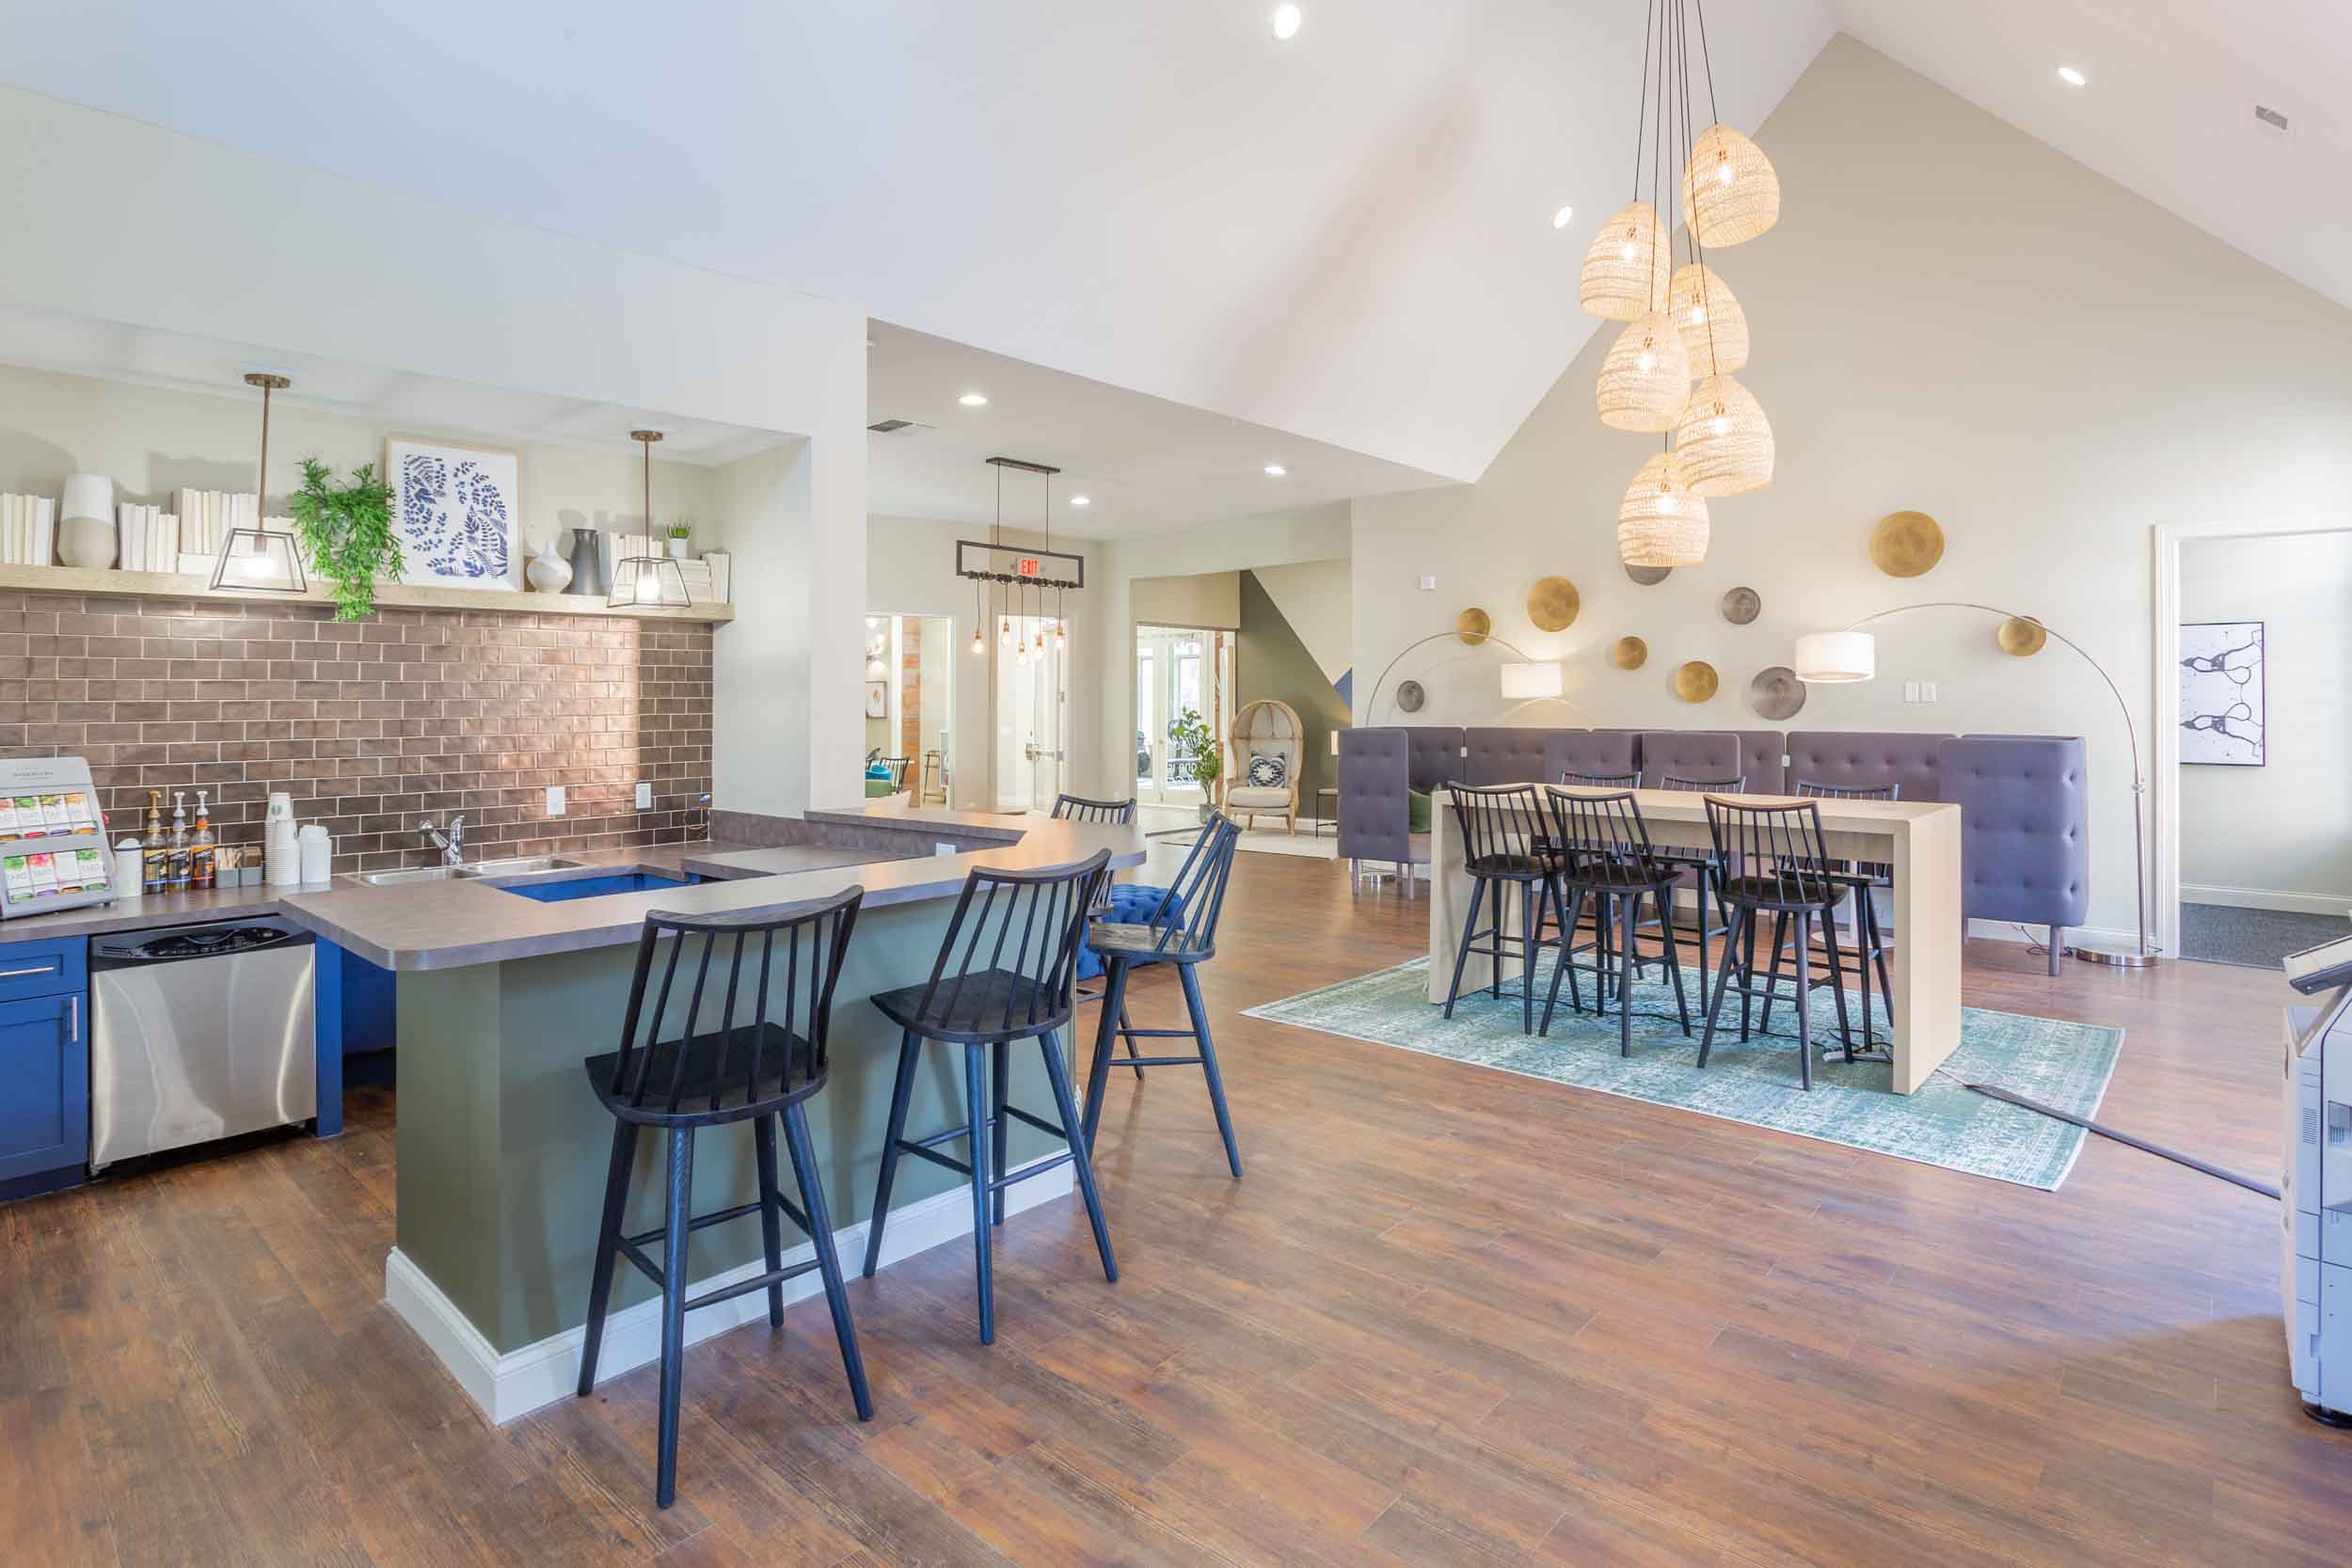 5 Must-Haves for Every Multi-Family Community Space